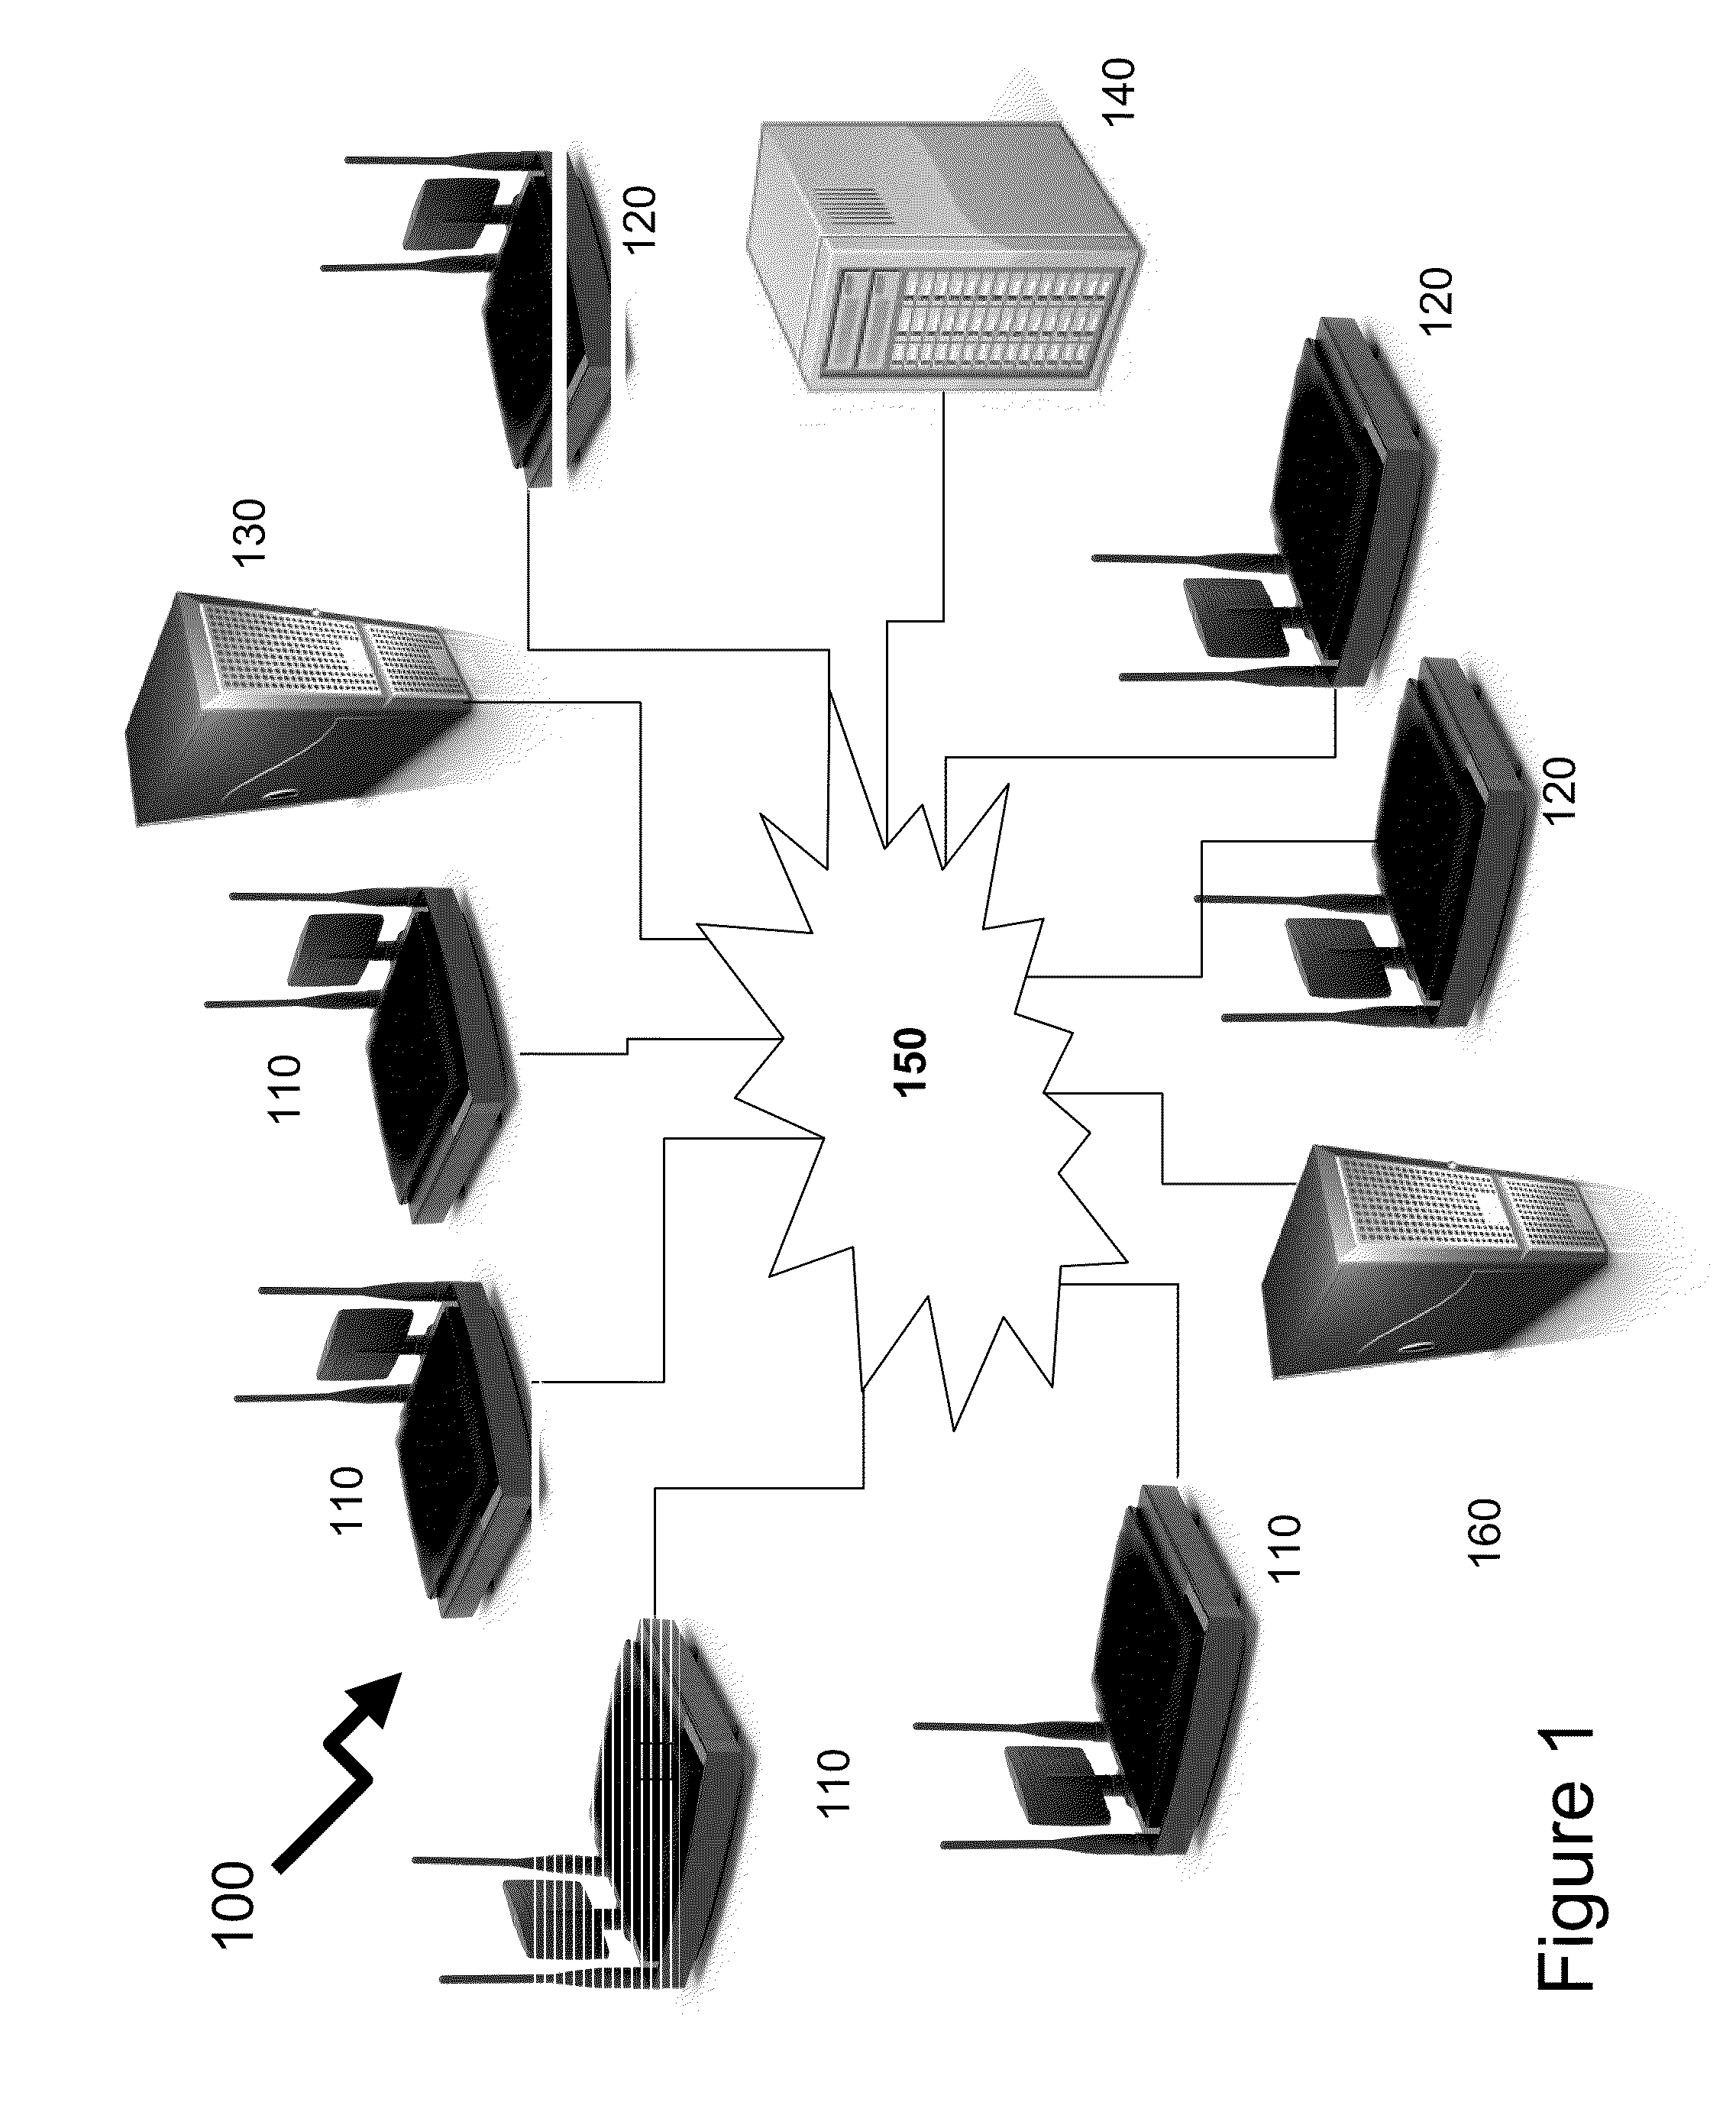 System and method for detecting RF transmissions in frequency bands of interest across a geographic area